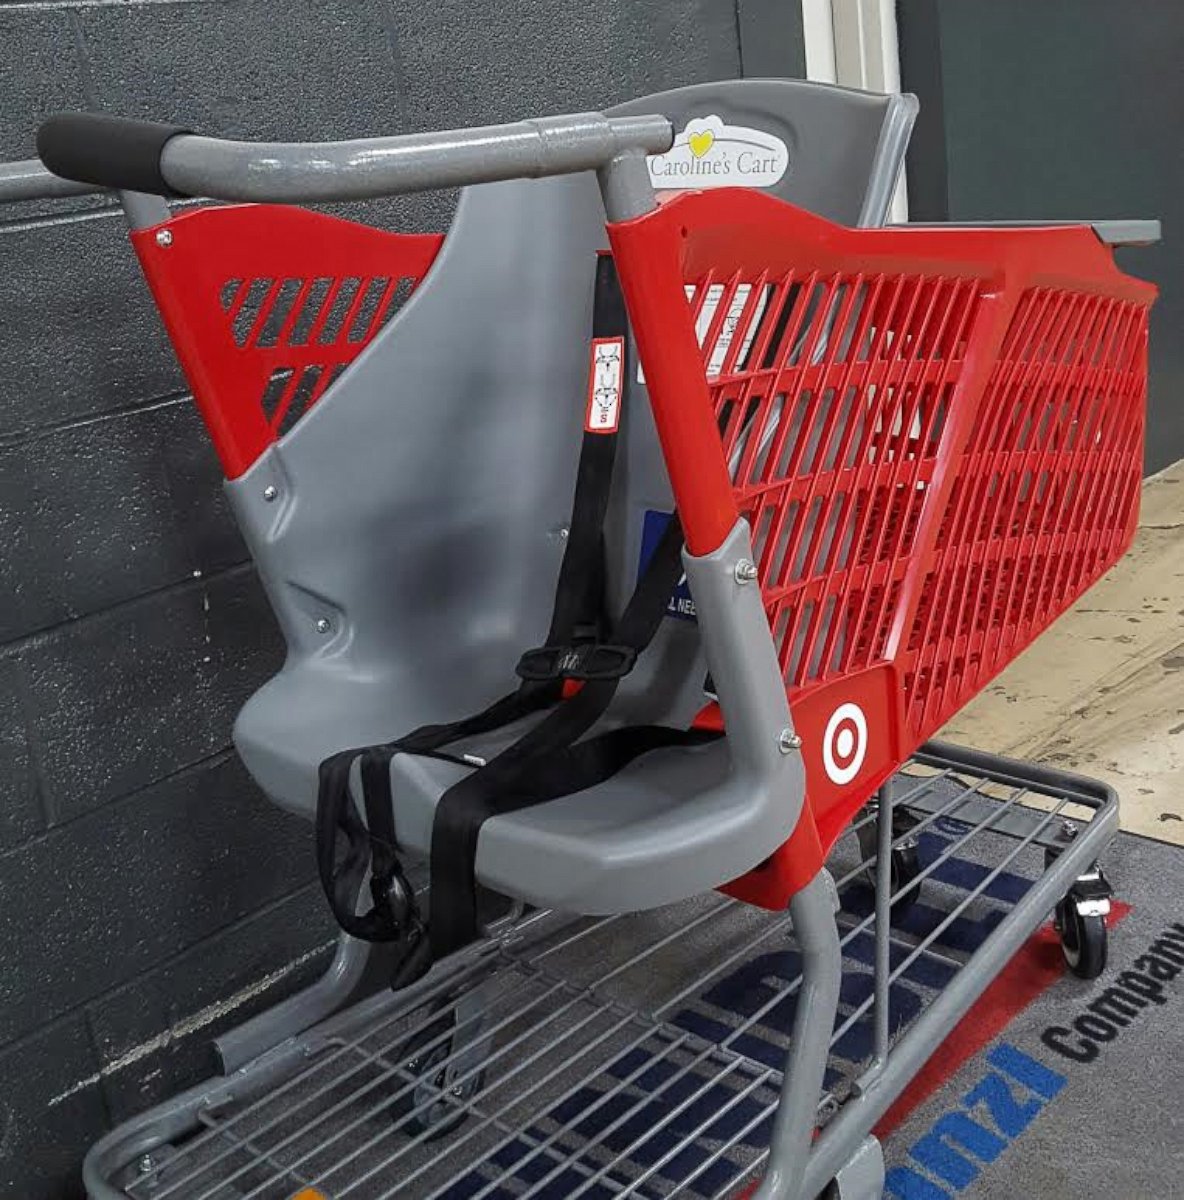 PHOTO: Caroline's Cart will now be available in nearly all Target stores to benefit the disabled.